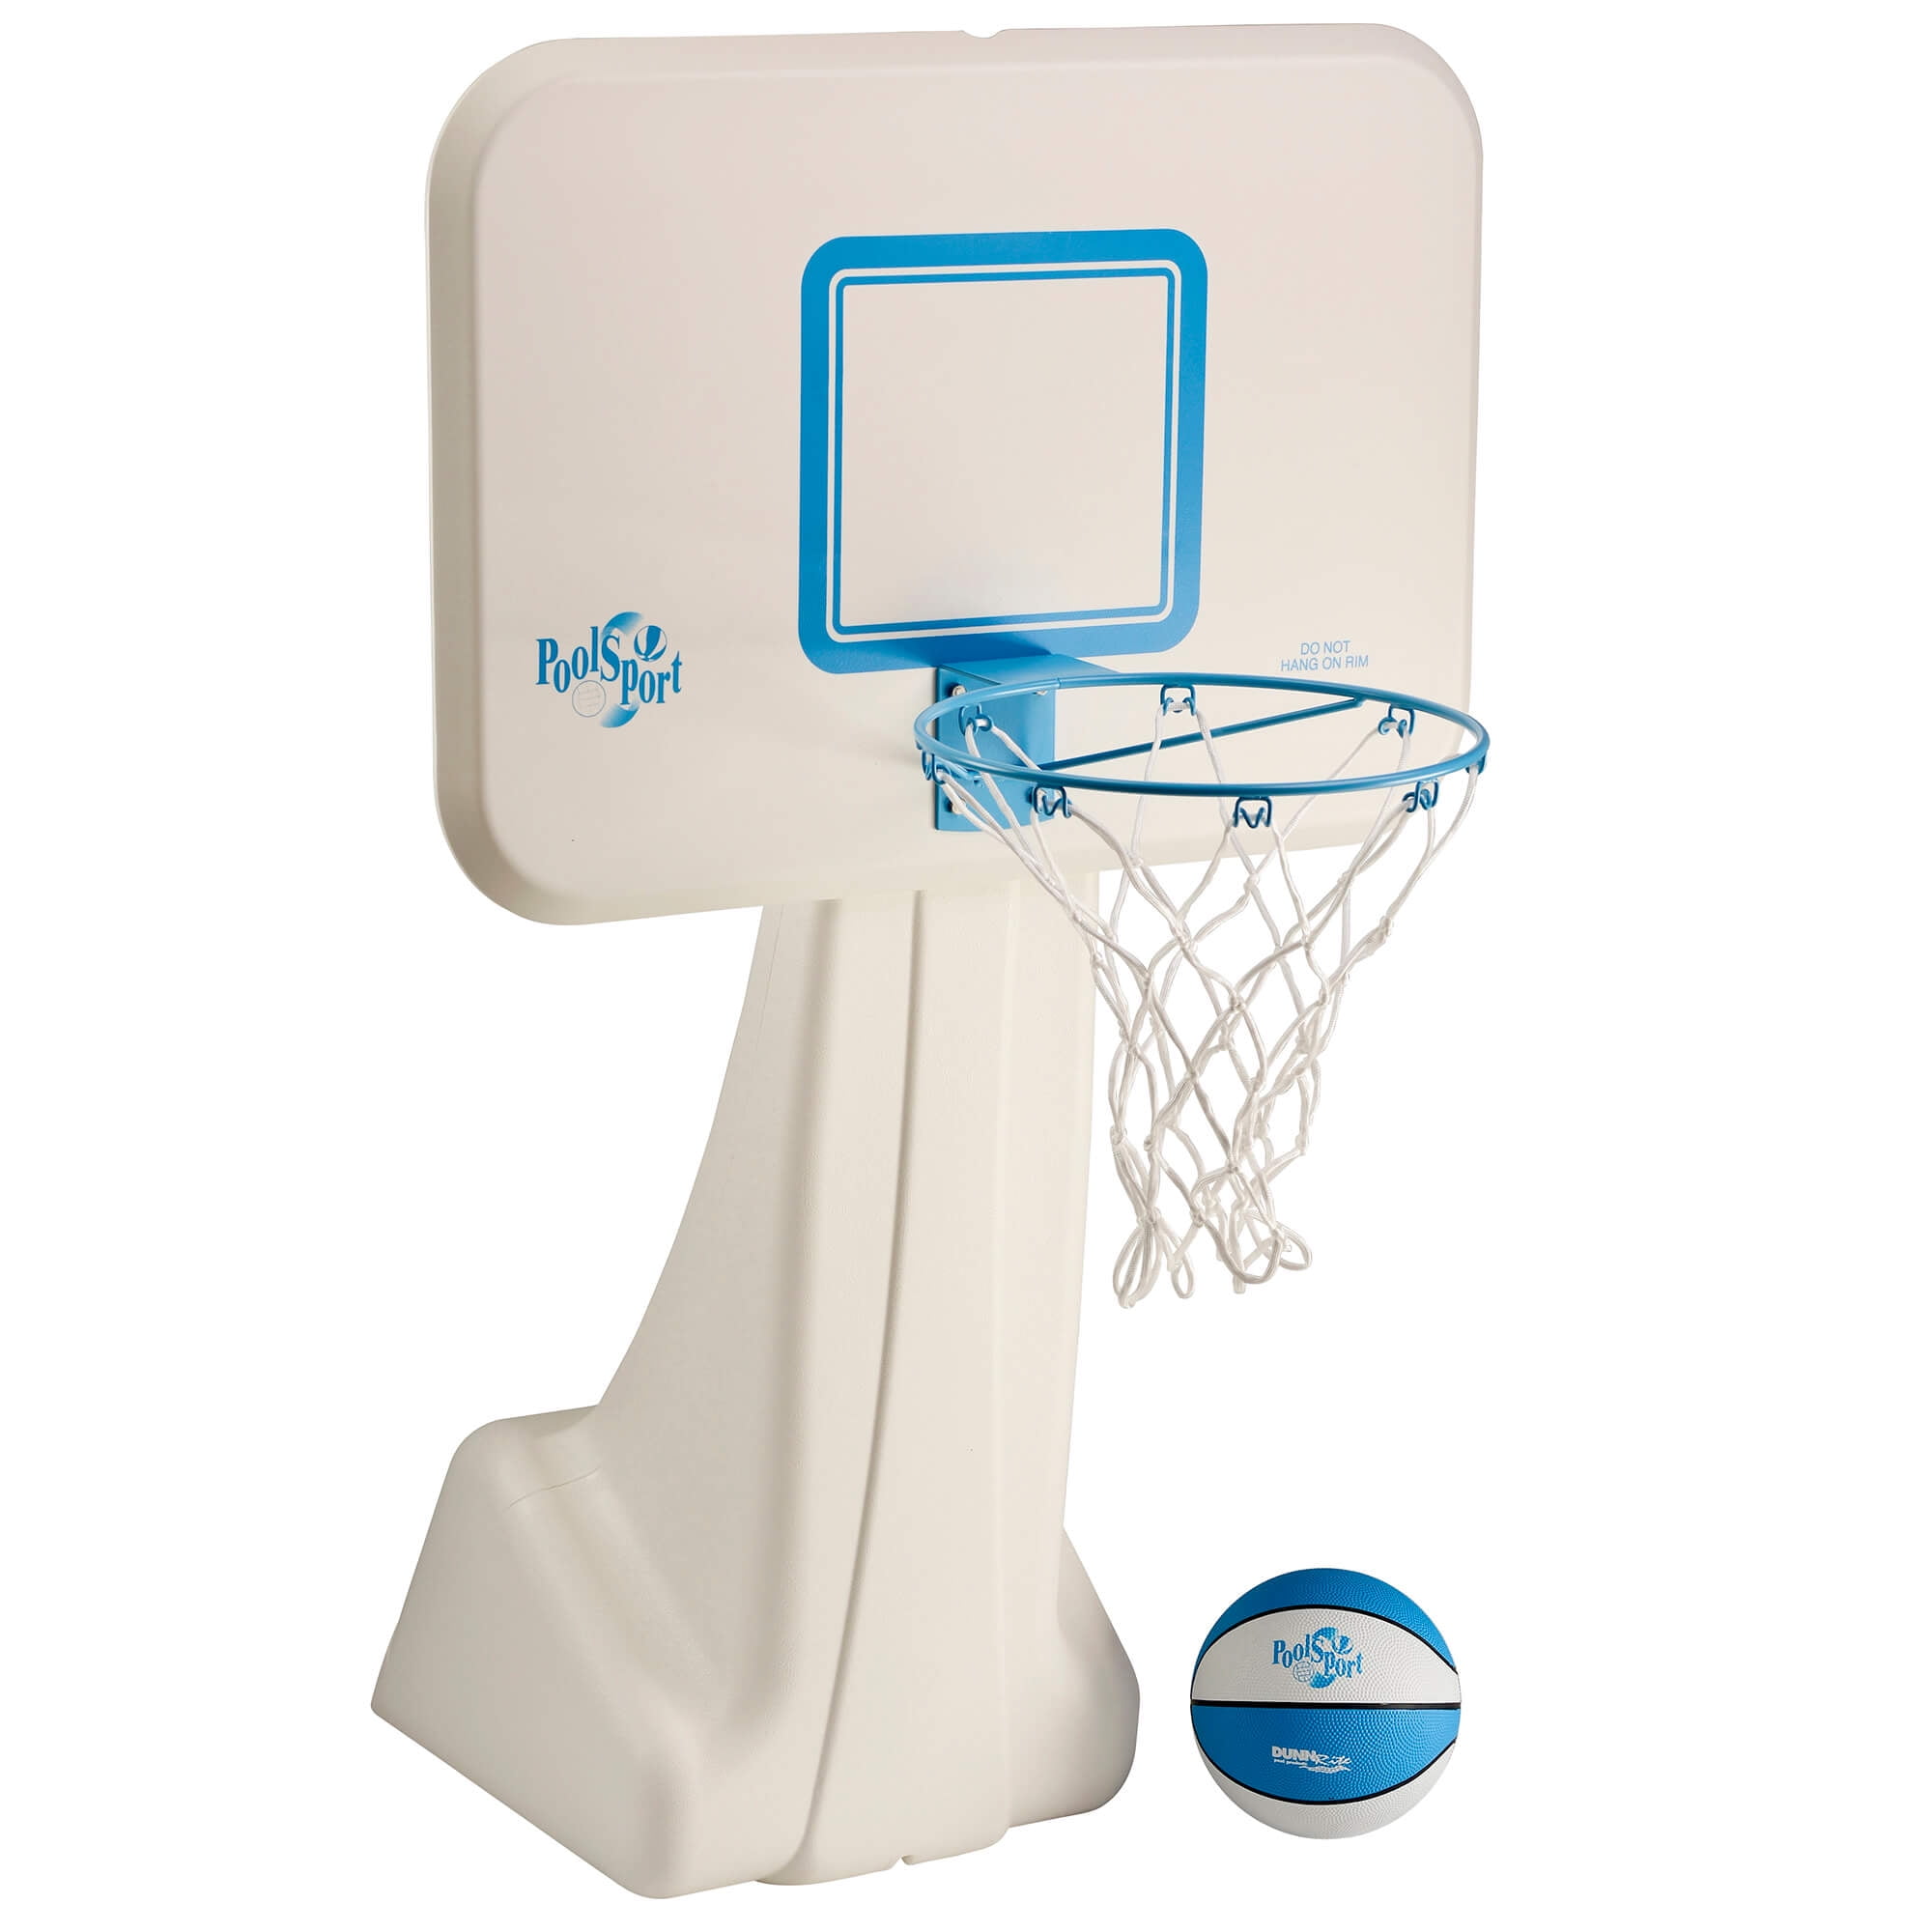 Dunn-Rite Pool Sport poolside basketball unit. The Dunn-Rite Pool Sport  Portable Pool Basketball Hoop (B950) features a color-matched ball textured  ball, 13.5\